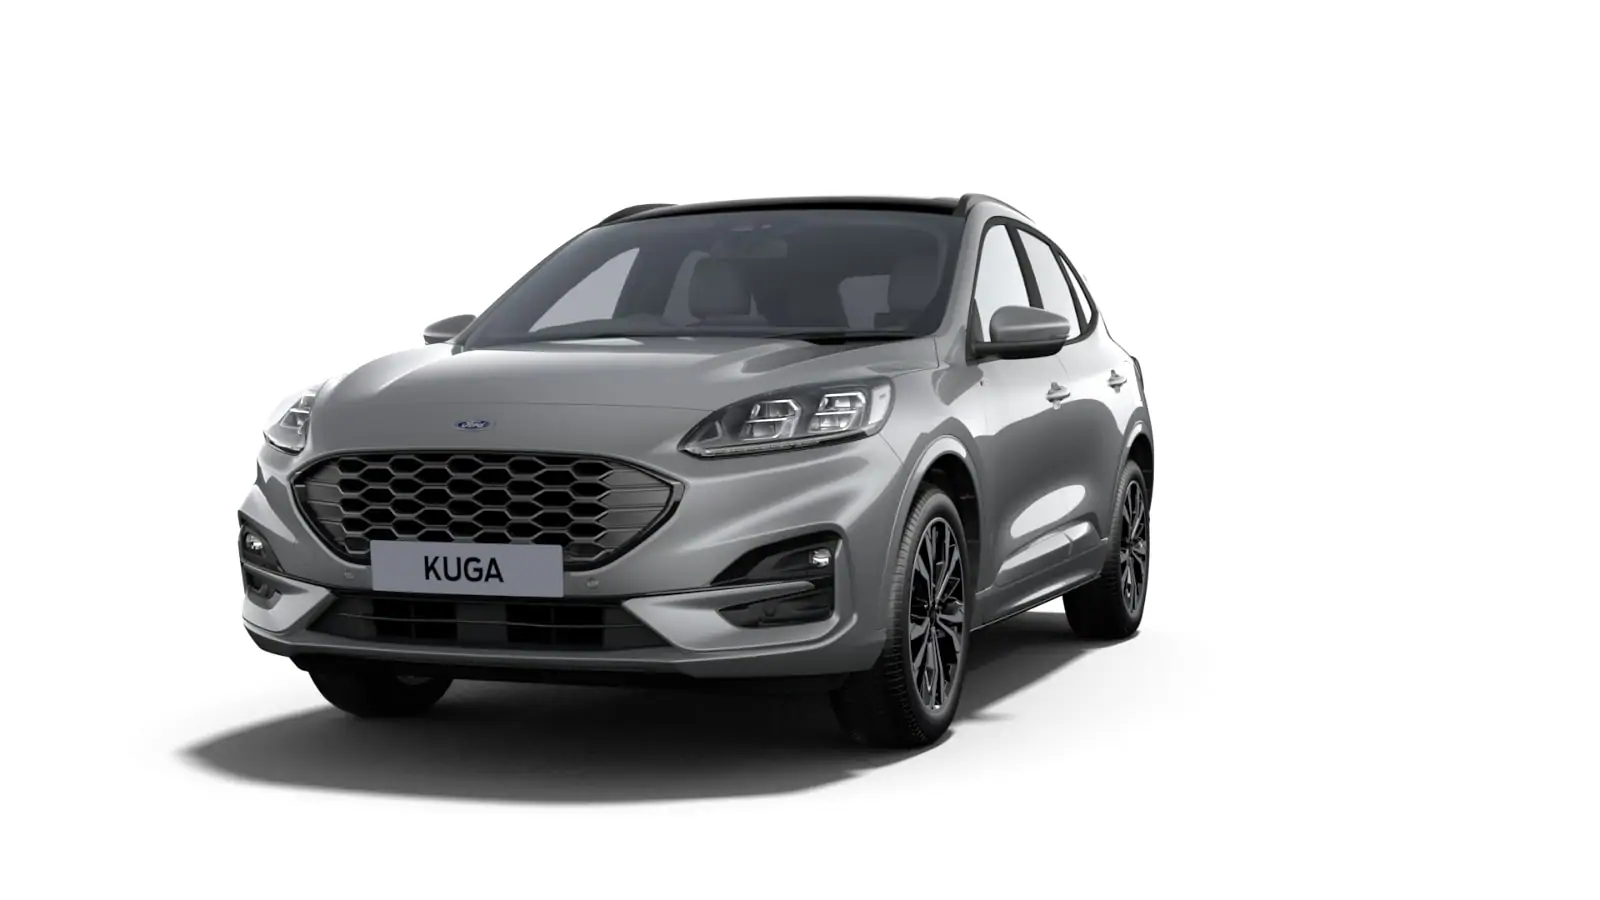 Nieuw Ford All-new kuga ST-Line X 1.5i EcoBoost 150pk/110kW - M6 NYH - "Solar Silver" Metaalkleur 1